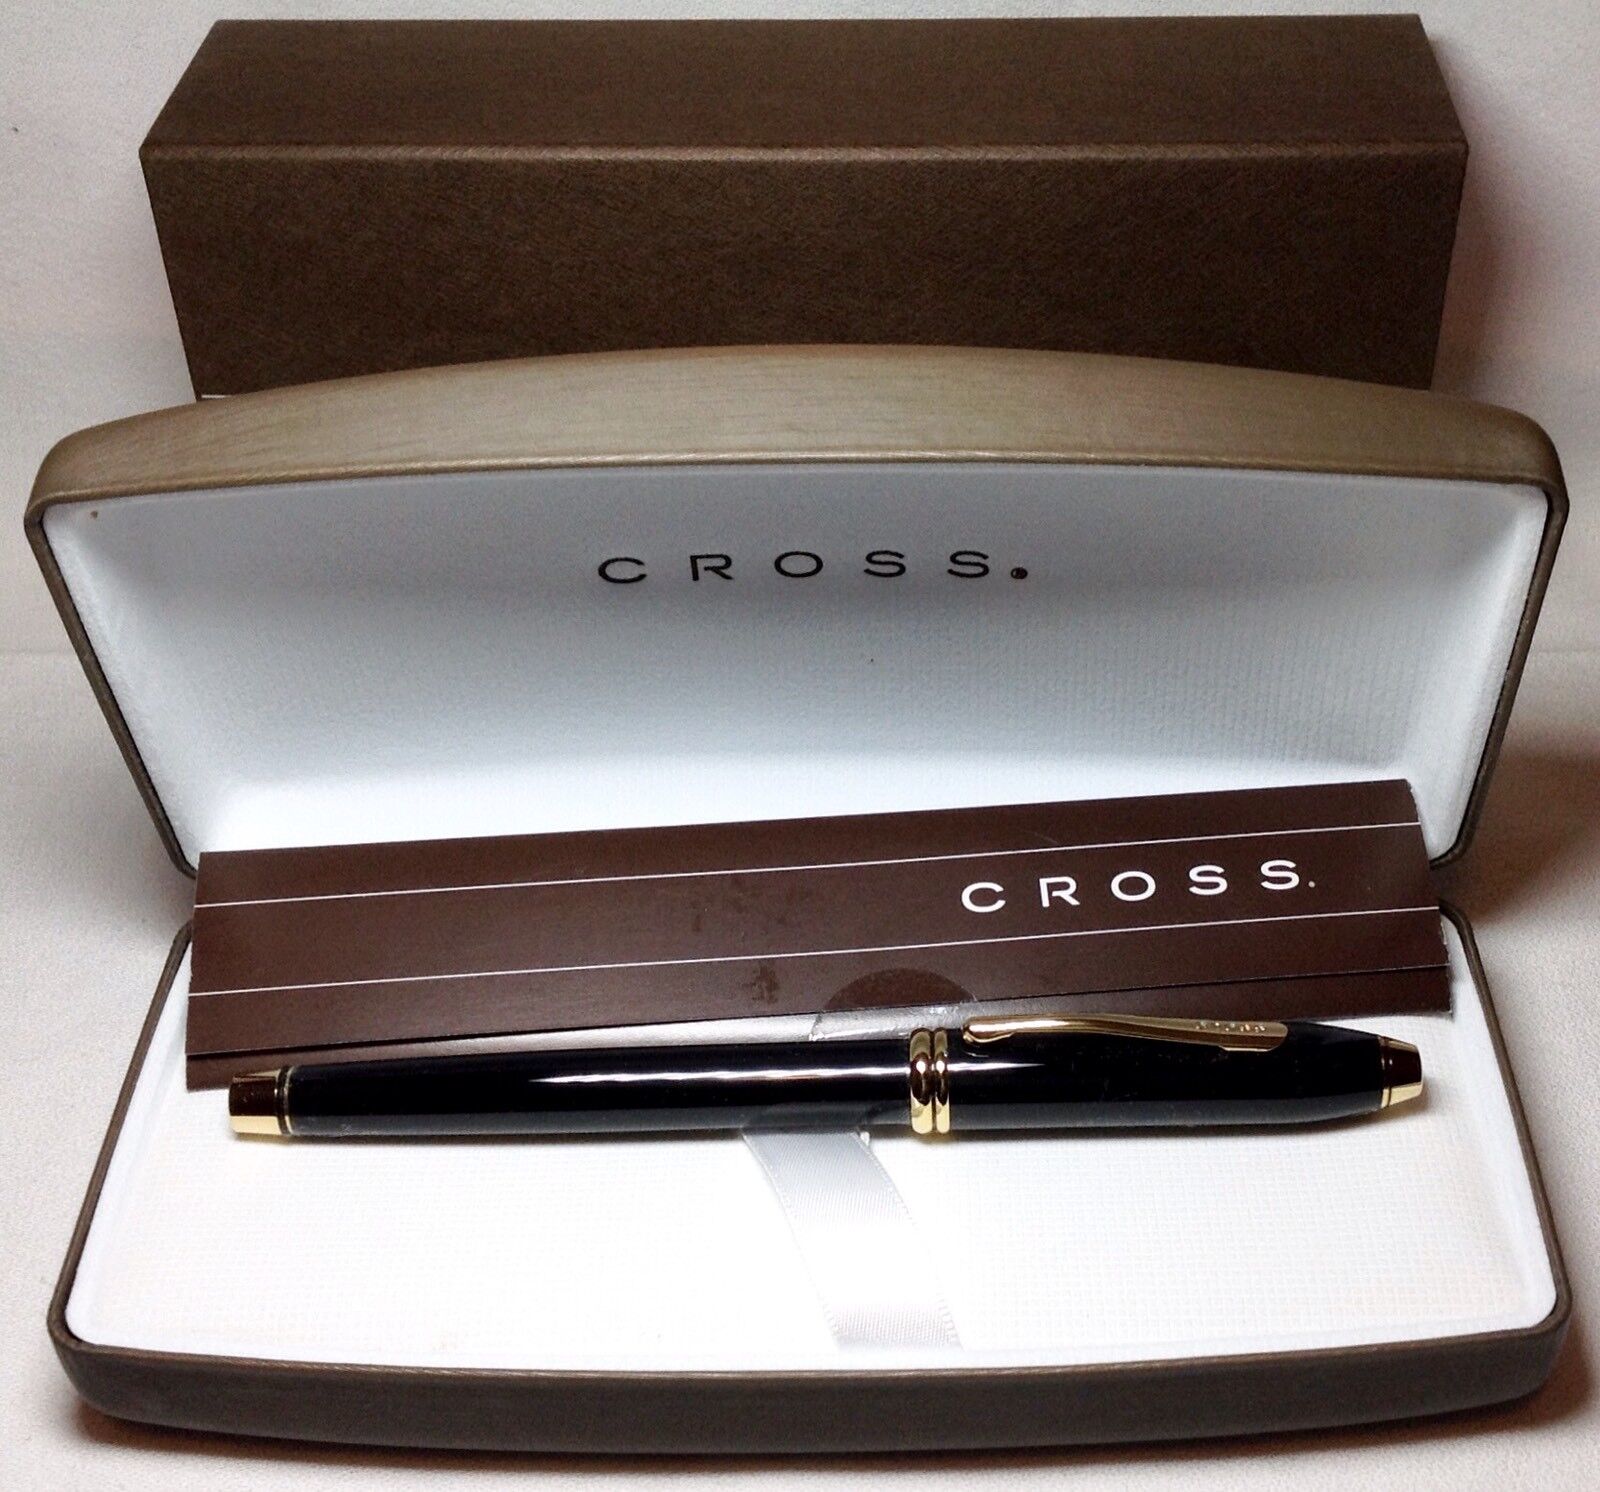 Cross Townsend Black With Gold Trim Roller Ball Pen #575 Sp New In Box Product